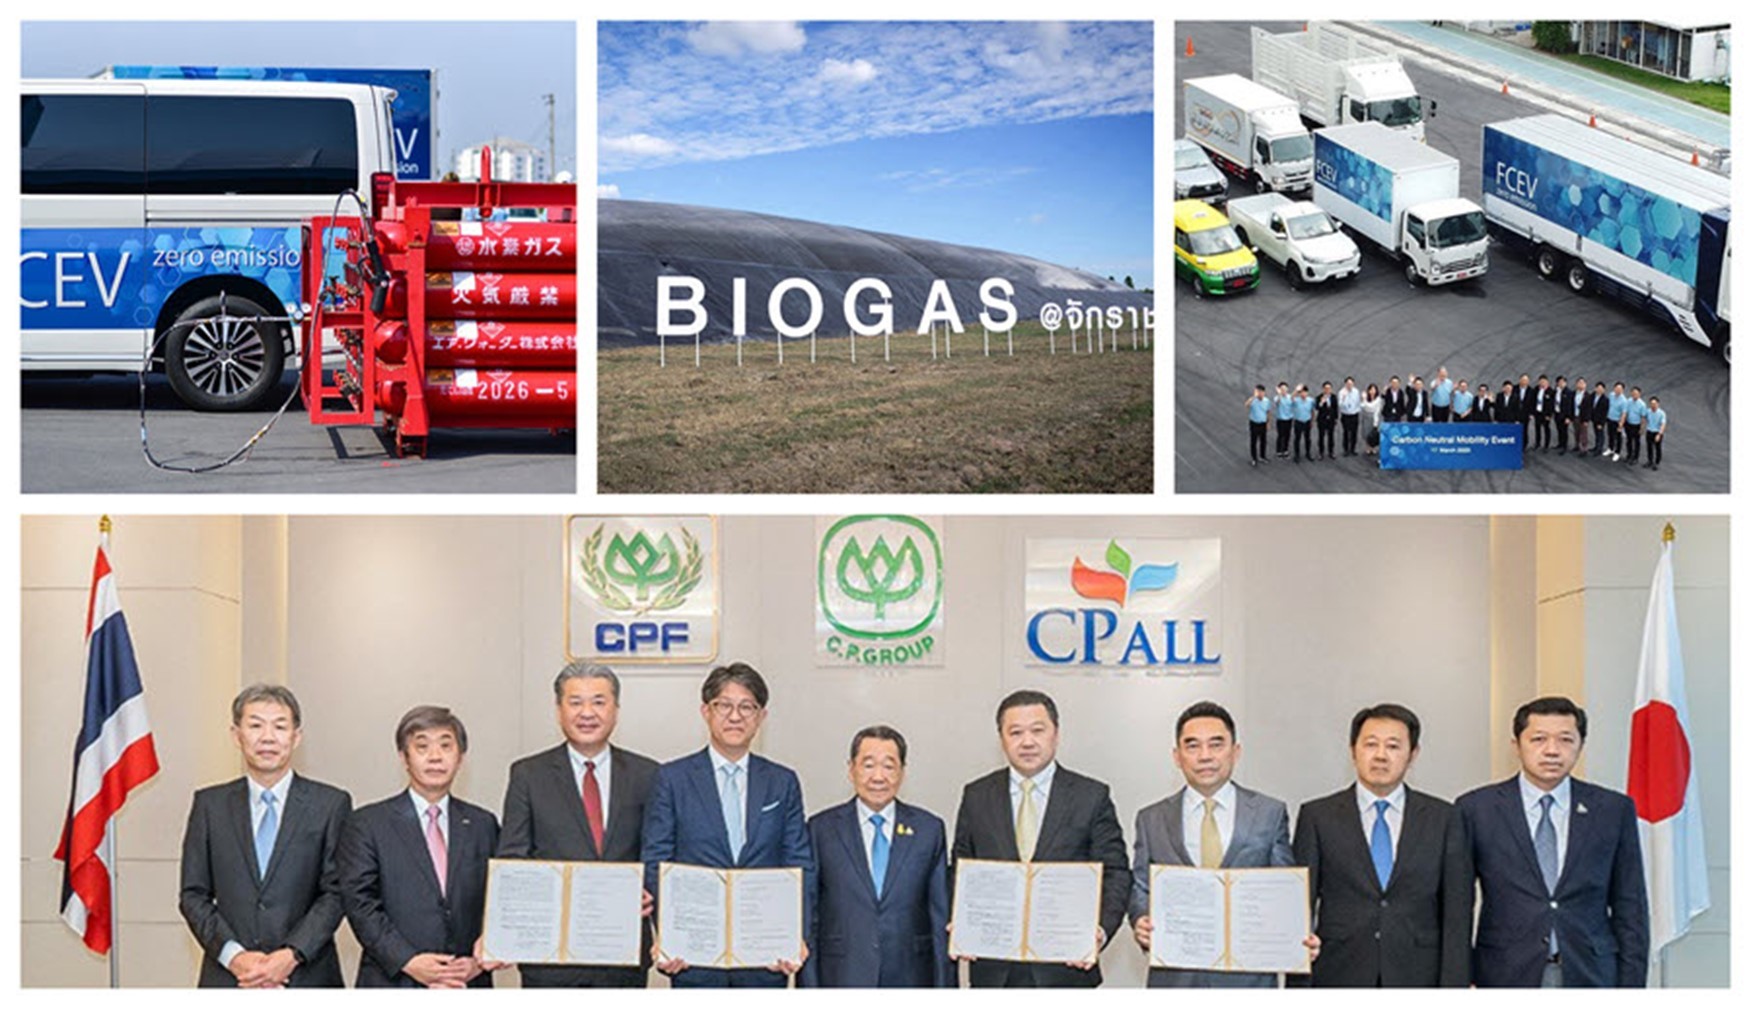 CP, Toyota, and CJPT Ink MOU for Carbon Neutrality in Thailand via Hydrogen and Energy Management